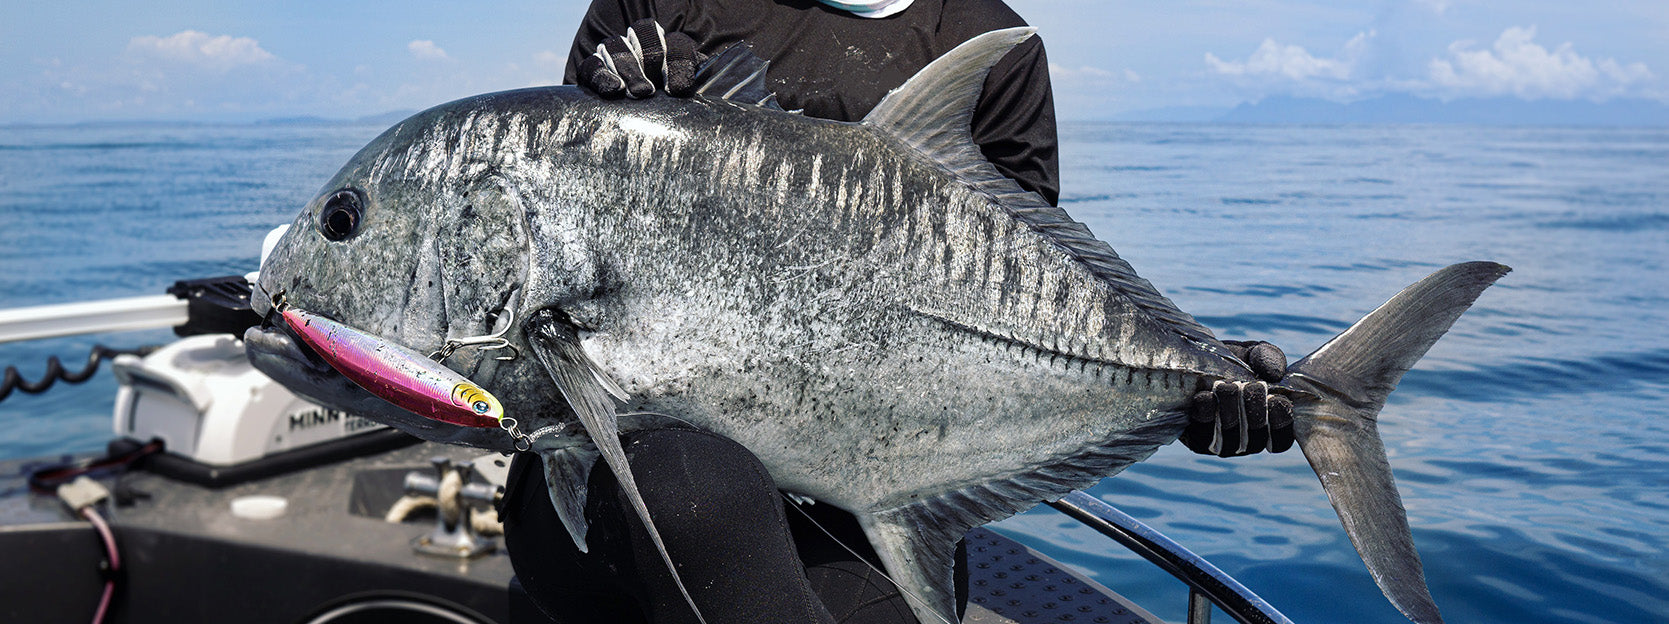 How to Catch Giant Trevally on the Great Barrier Reef – Daiwa